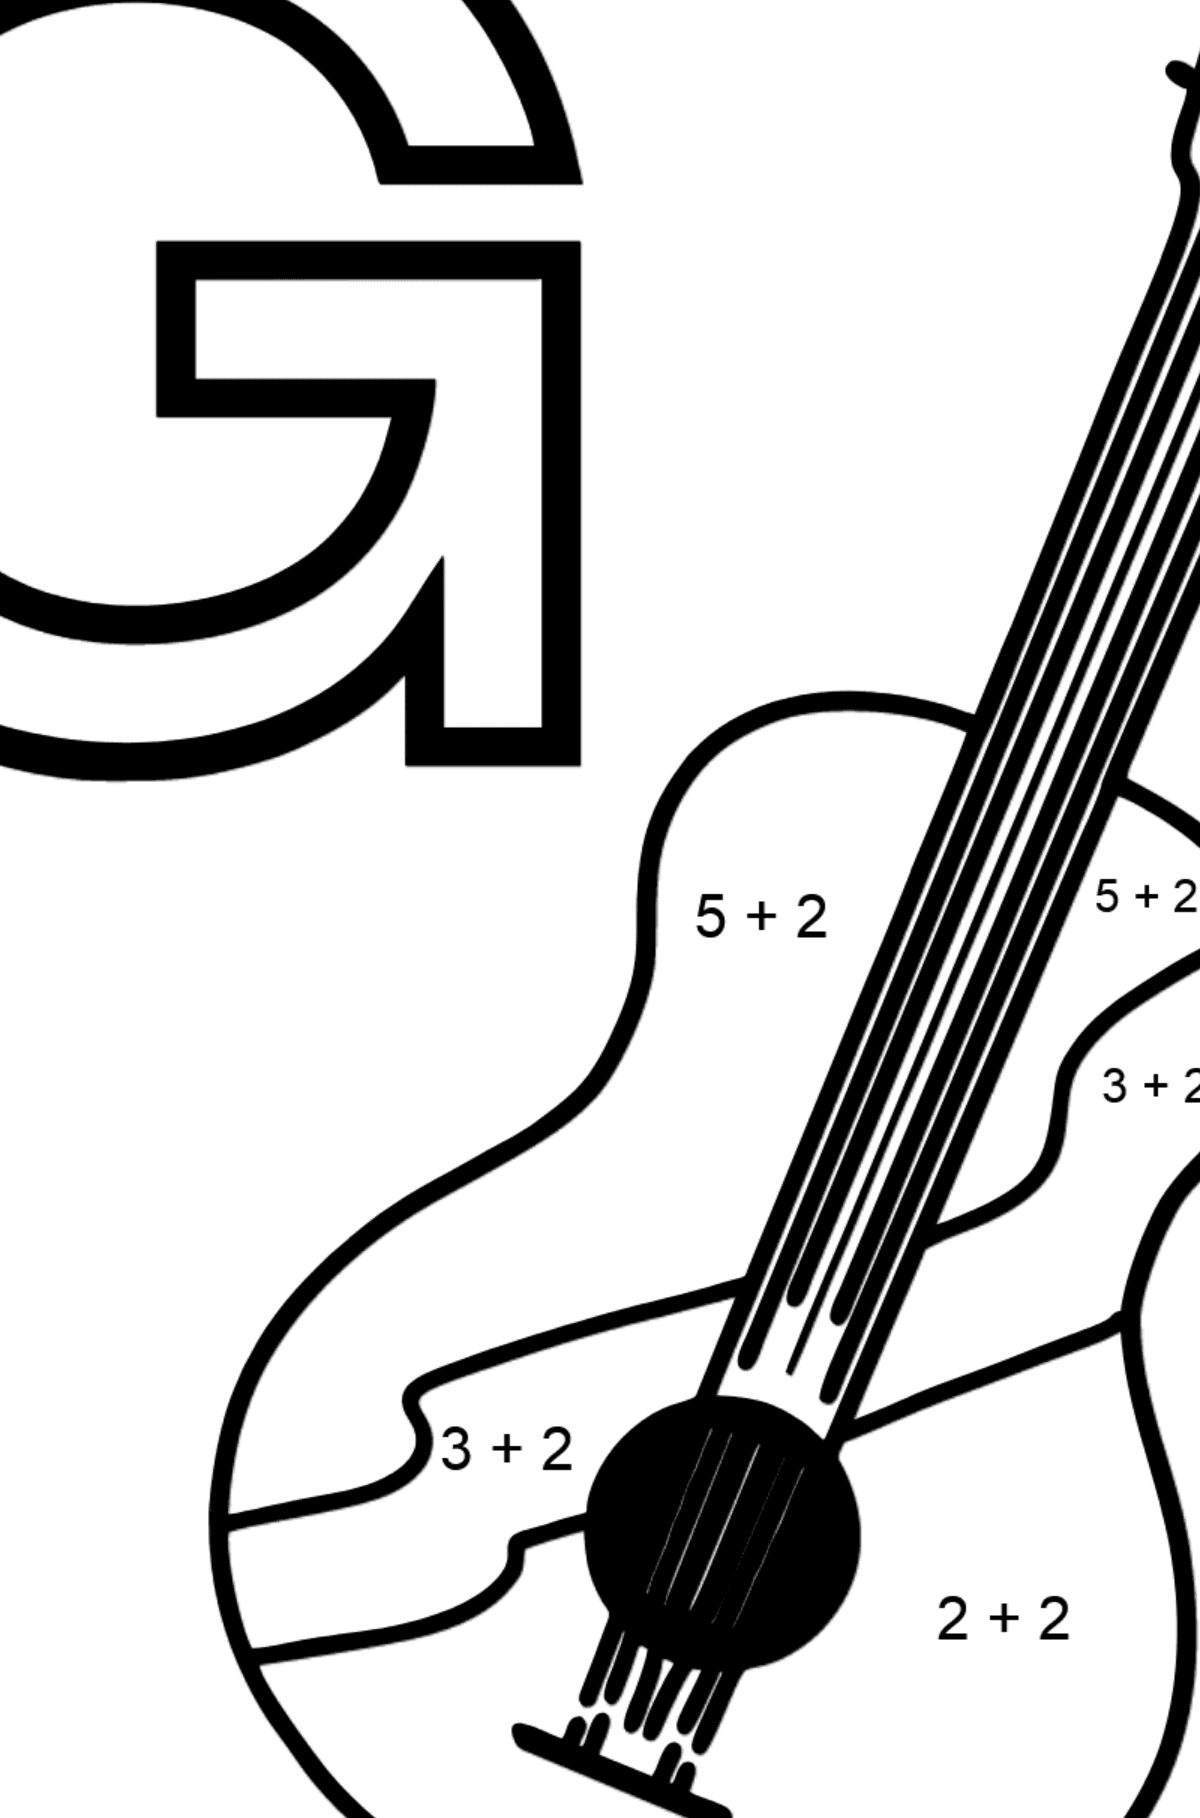 Spanish Letter G coloring pages - GUITARRA - Math Coloring - Addition for Kids